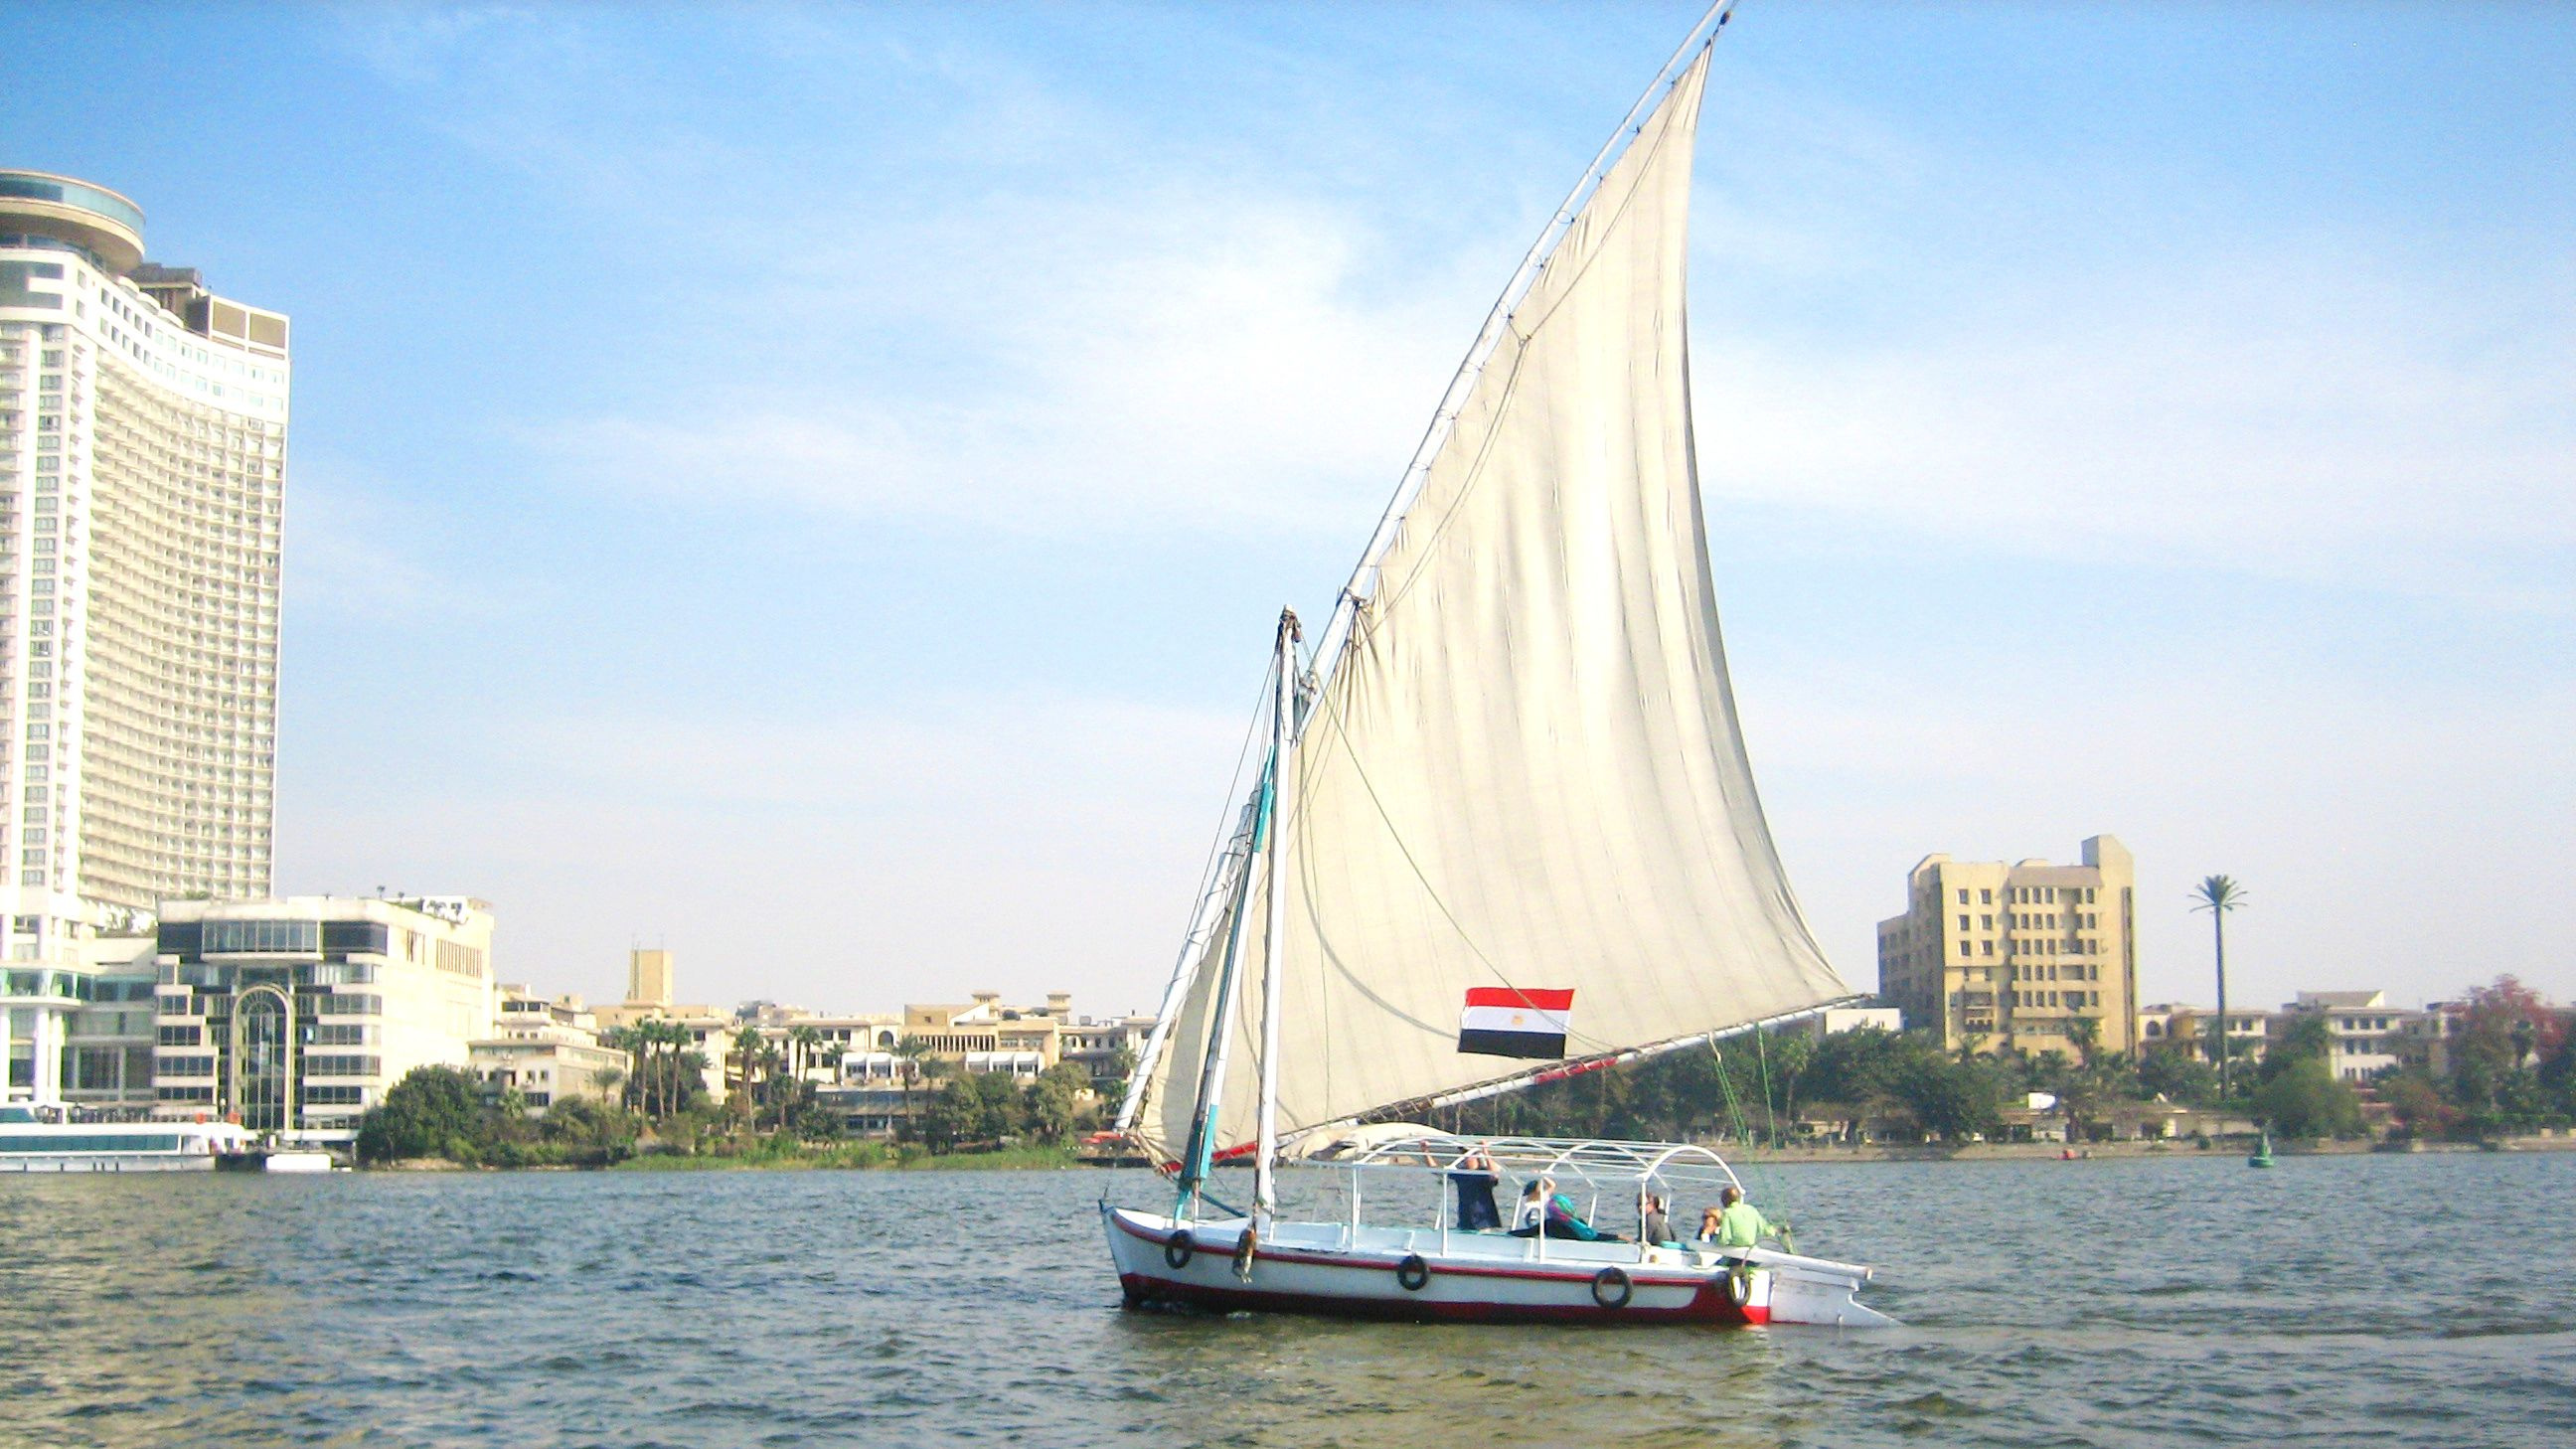 Felucca Ride on the Nile of Cairo